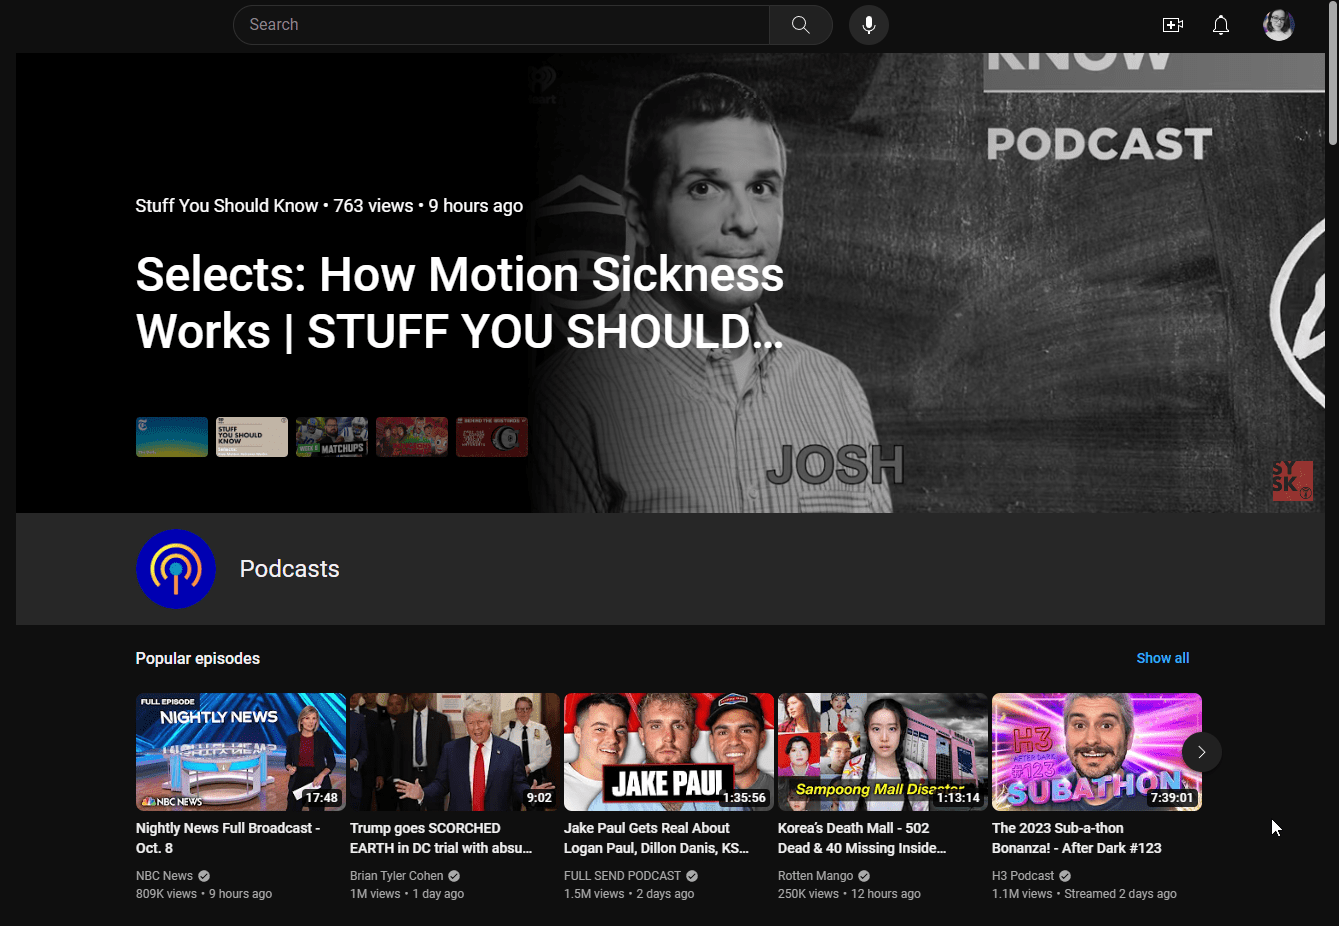 YouTube’s US-only podcast discovery page